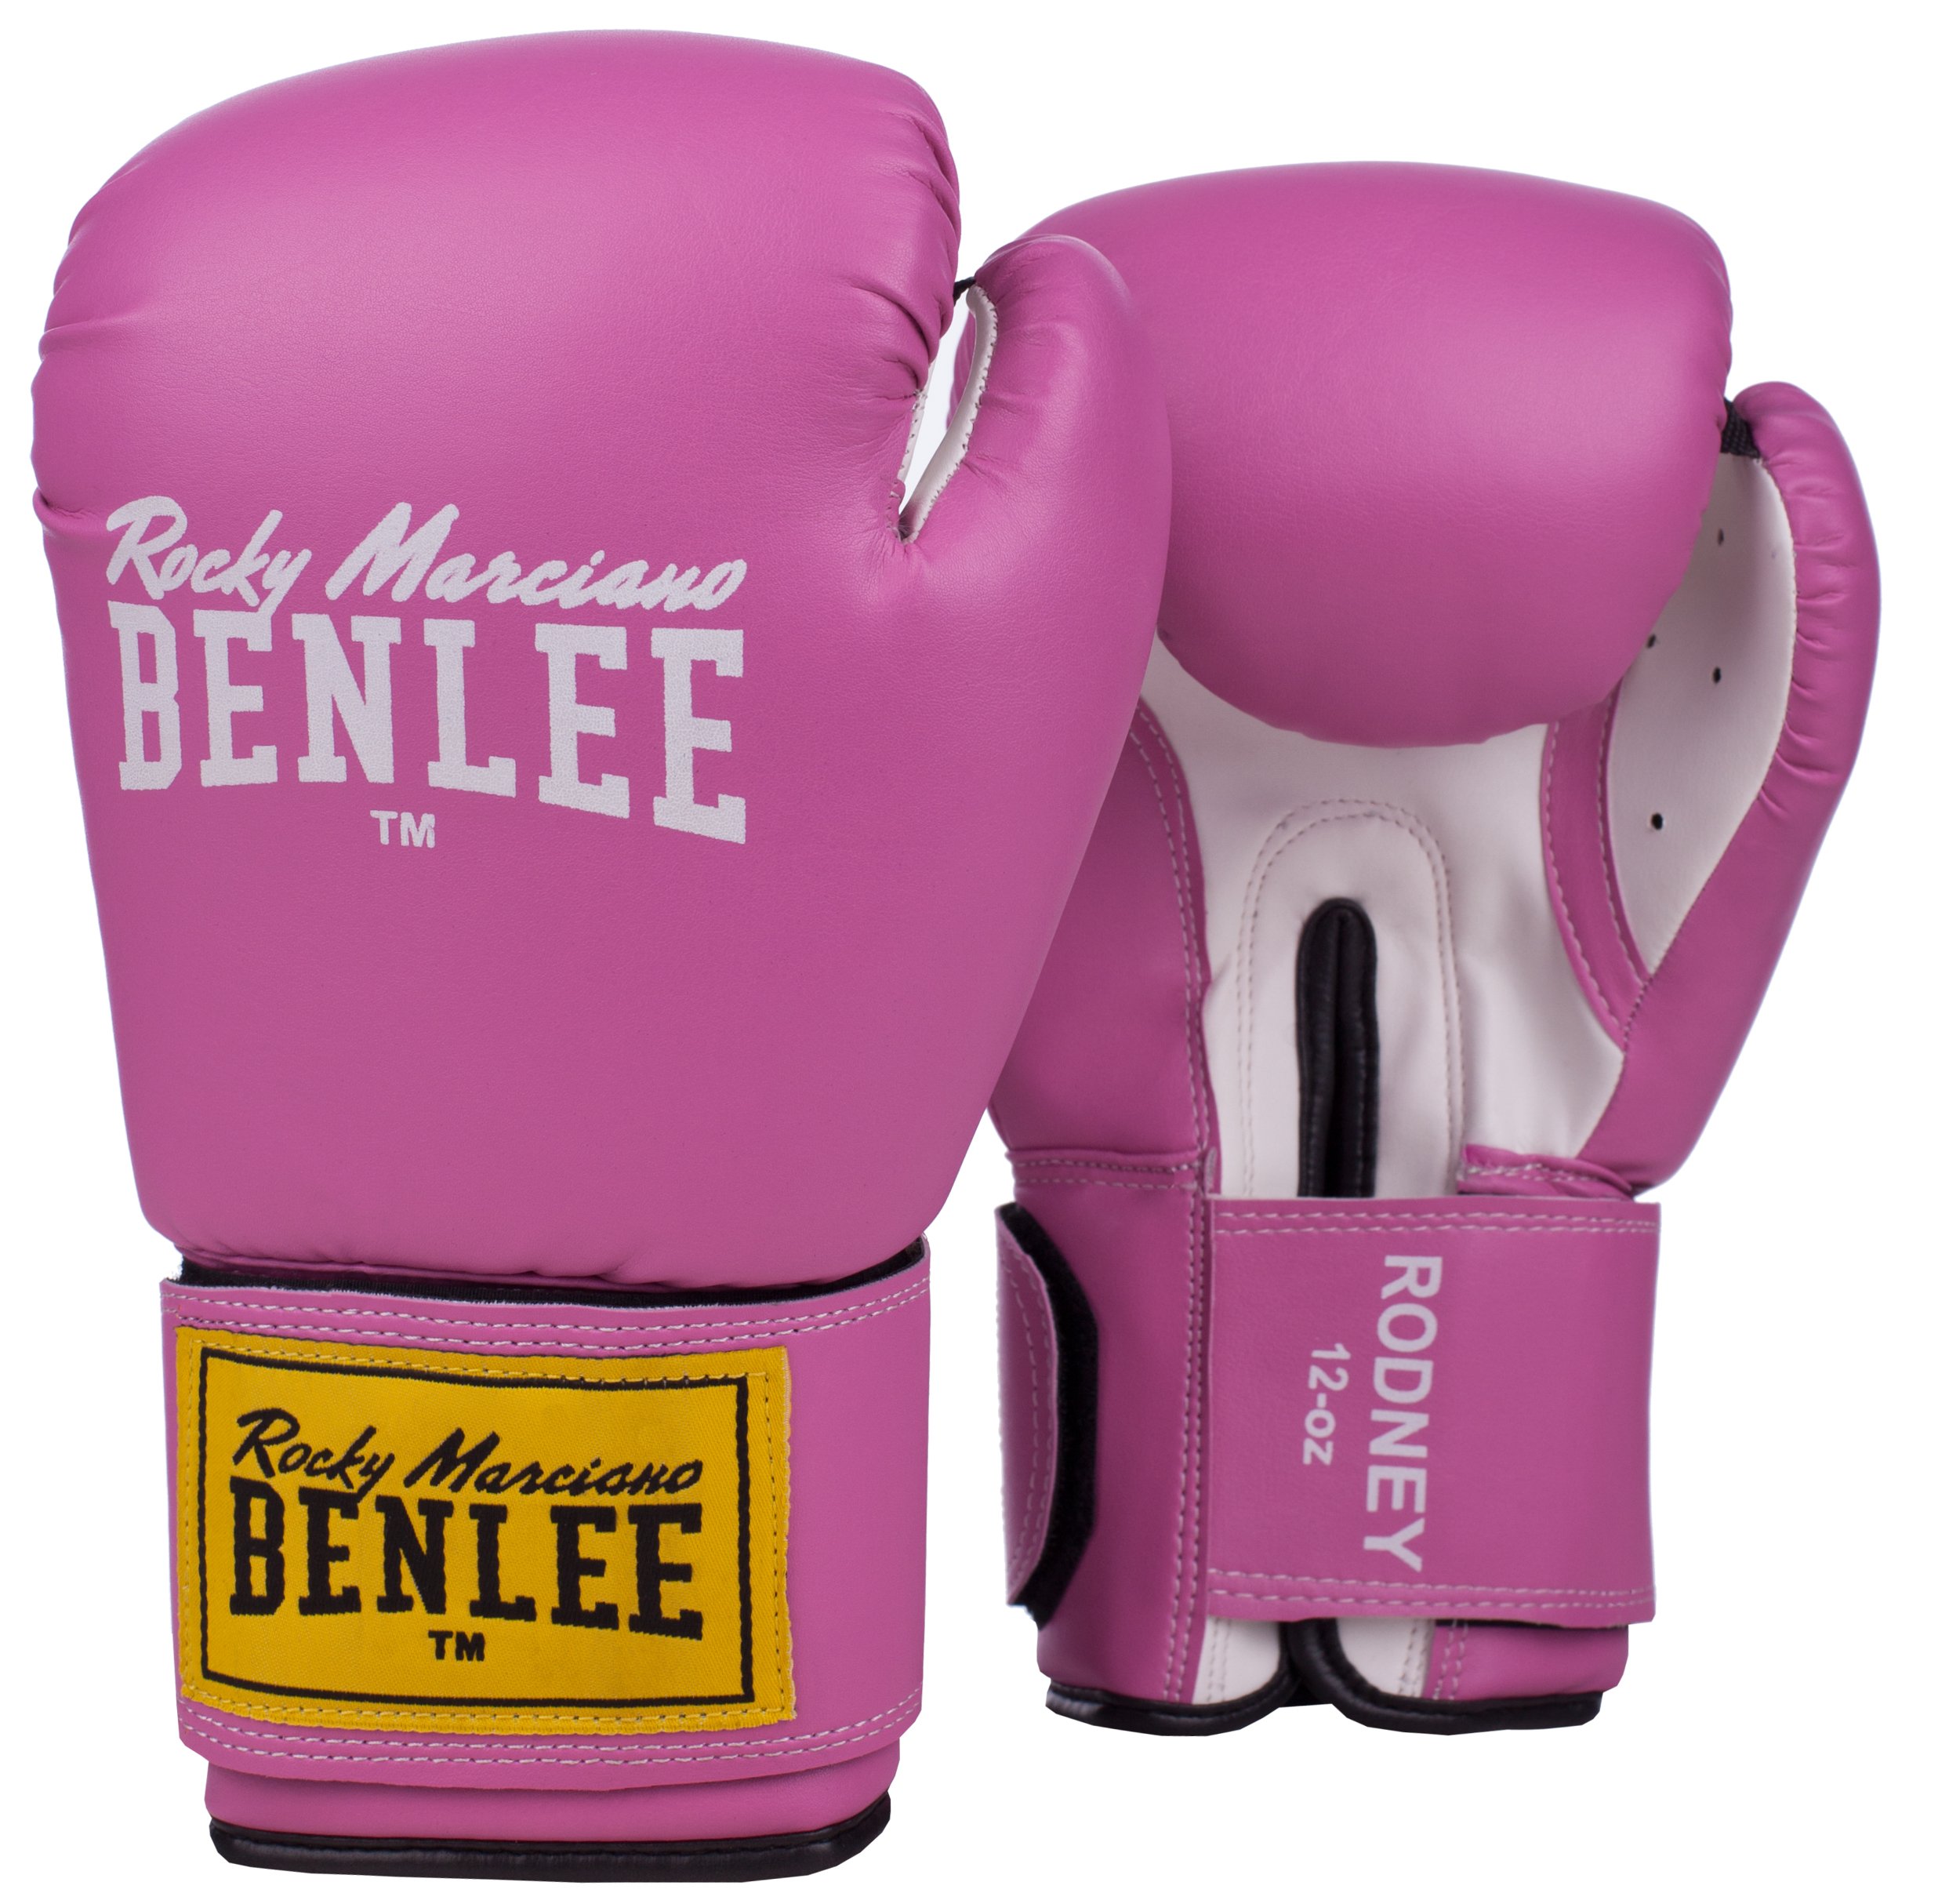 BENLEE Boxhandschuhe aus Artificial Leather Rodney Pink/White 10 oz